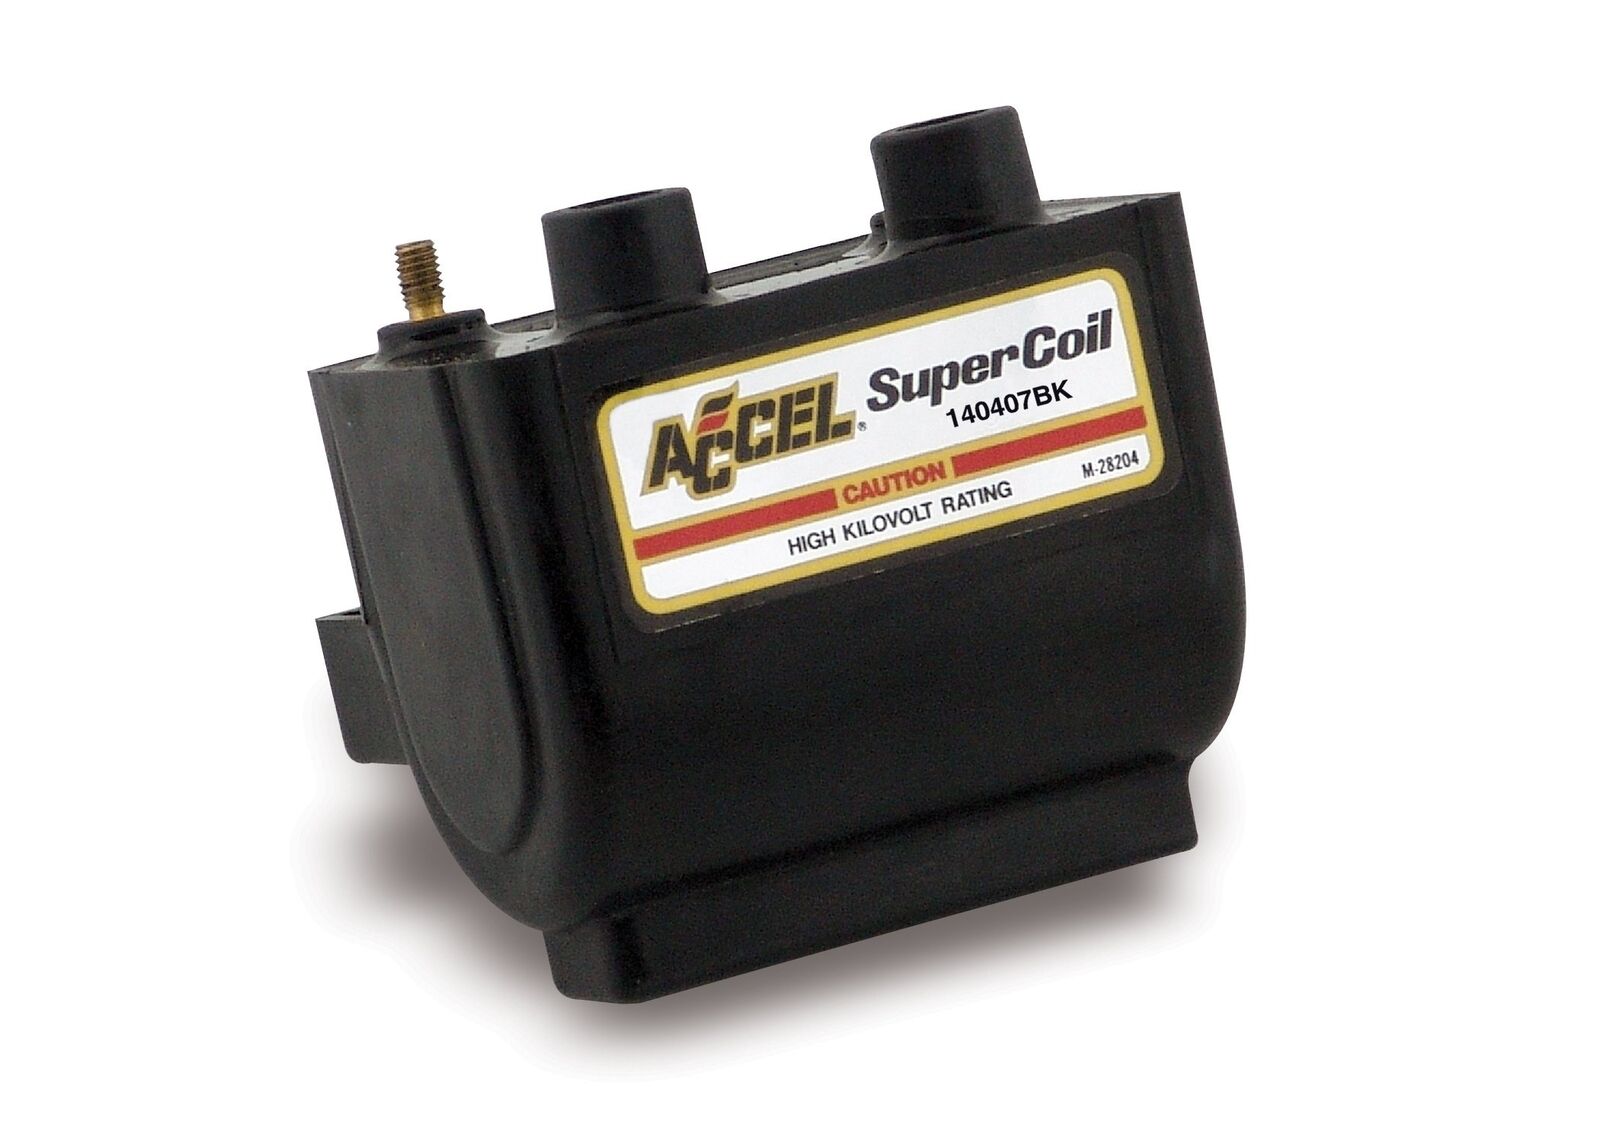 ACCEL Motorcycle 140407BK Super Coil - Electronic - Dual Fire - Black